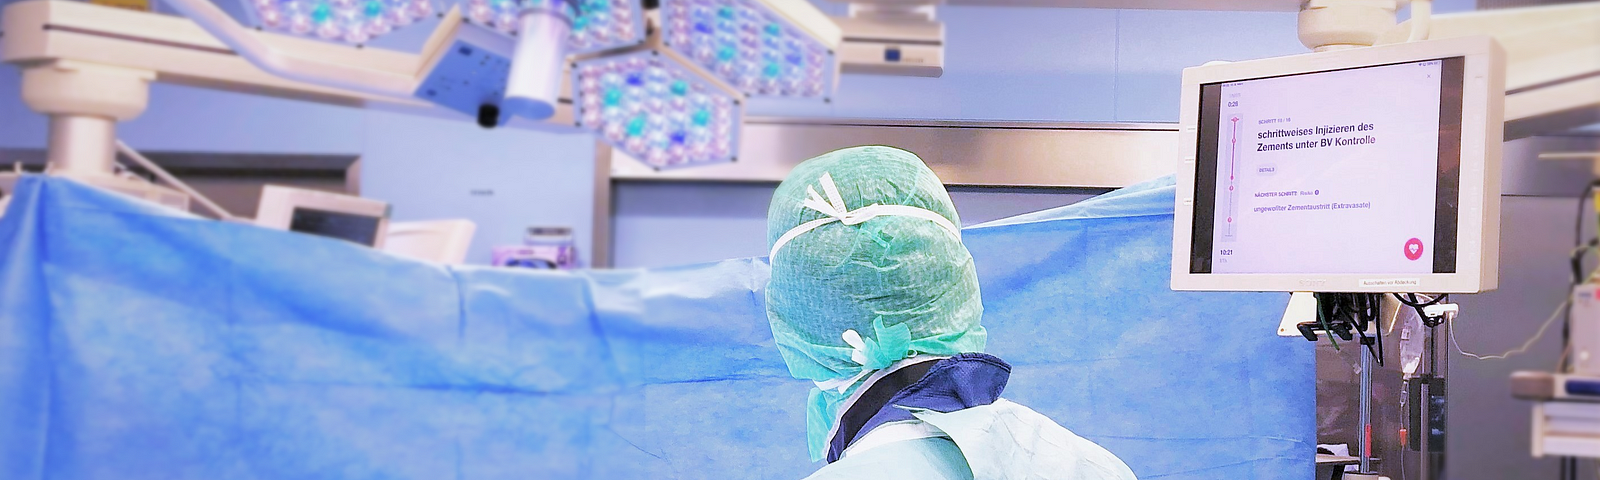 A surgeon looking at the Nodus Medical application on a screen in an operating room while performing a surgery.